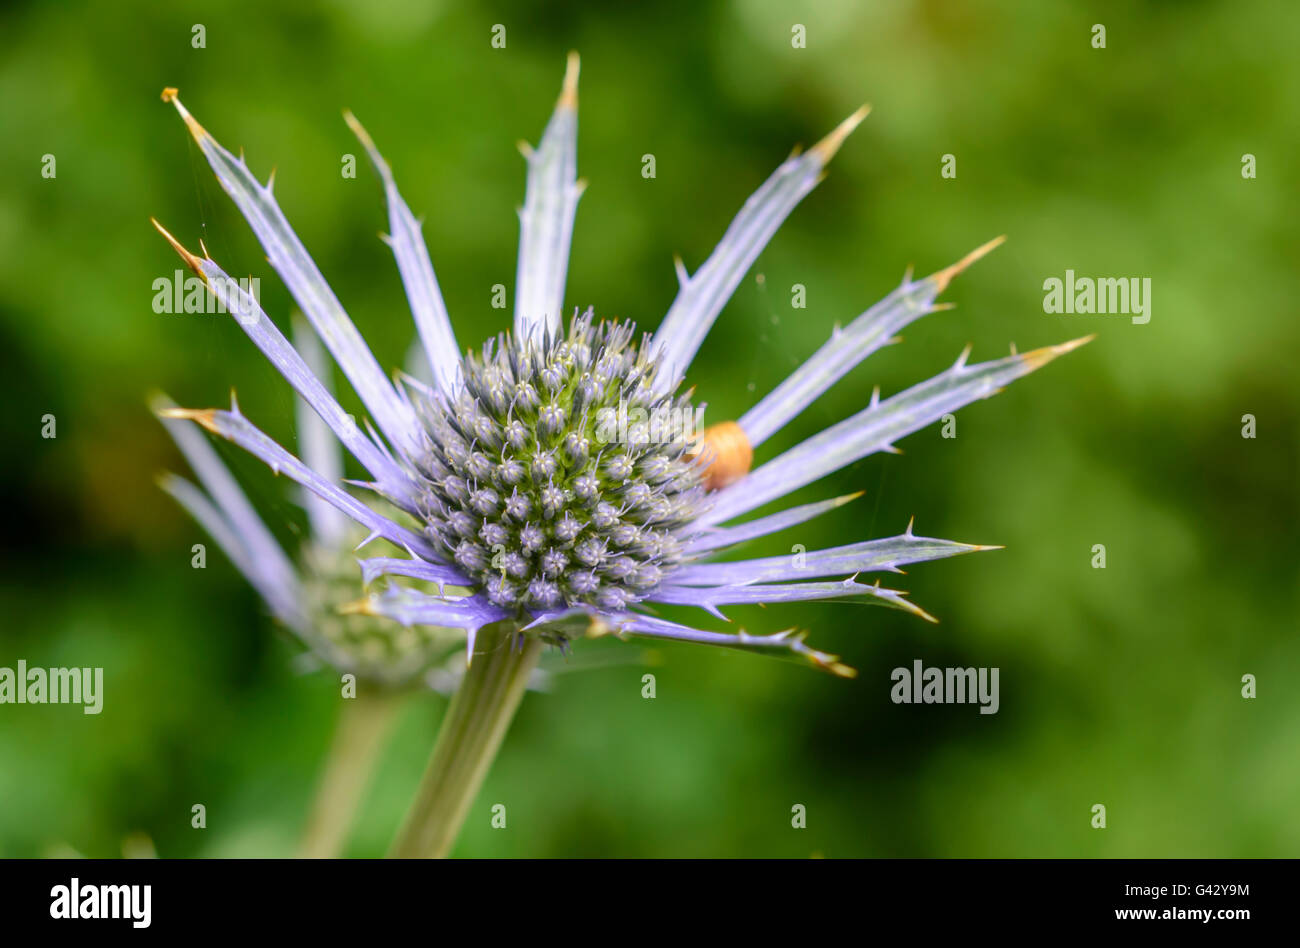 Early stages of Sea Holly, also known as Oliver eryngo (Eryngium x oliverianum) growing in June in West Sussex, England, UK. Stock Photo